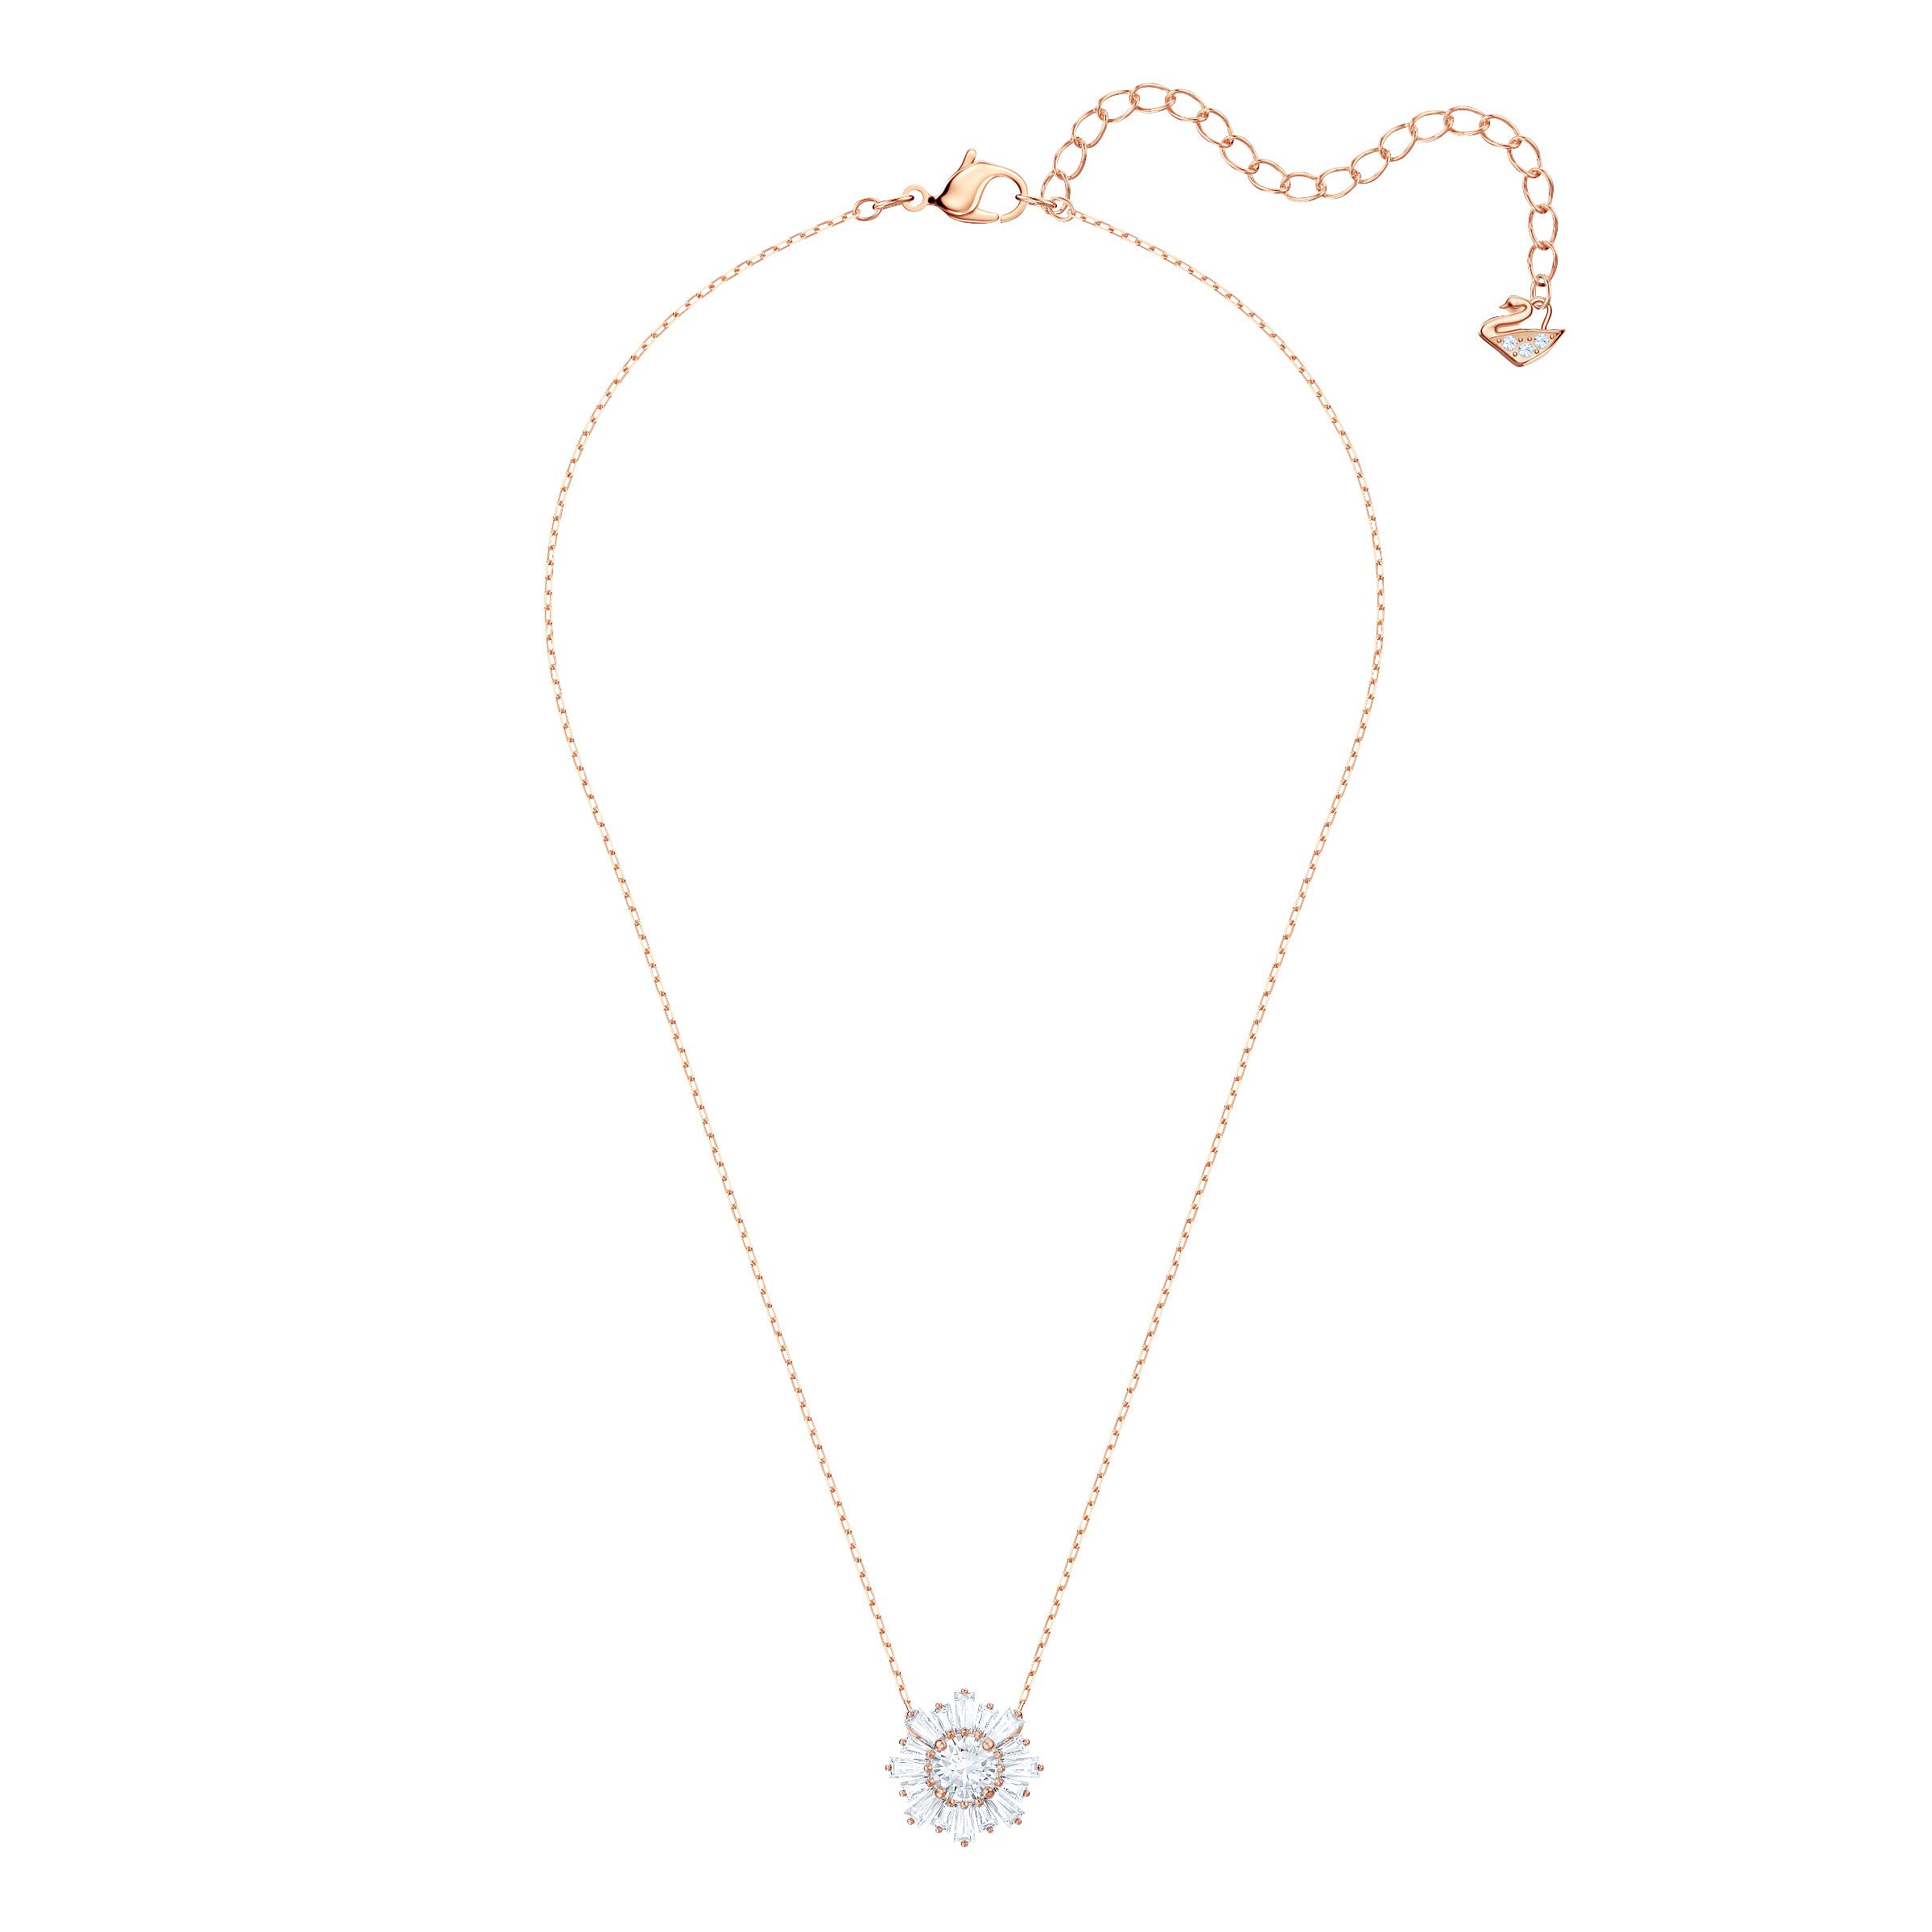 SWAROVSKI Sunshine Necklaces and Earrings Jewelry Collection, Clear Crystals, Pink Crystals, Rose Gold-Tone Finish